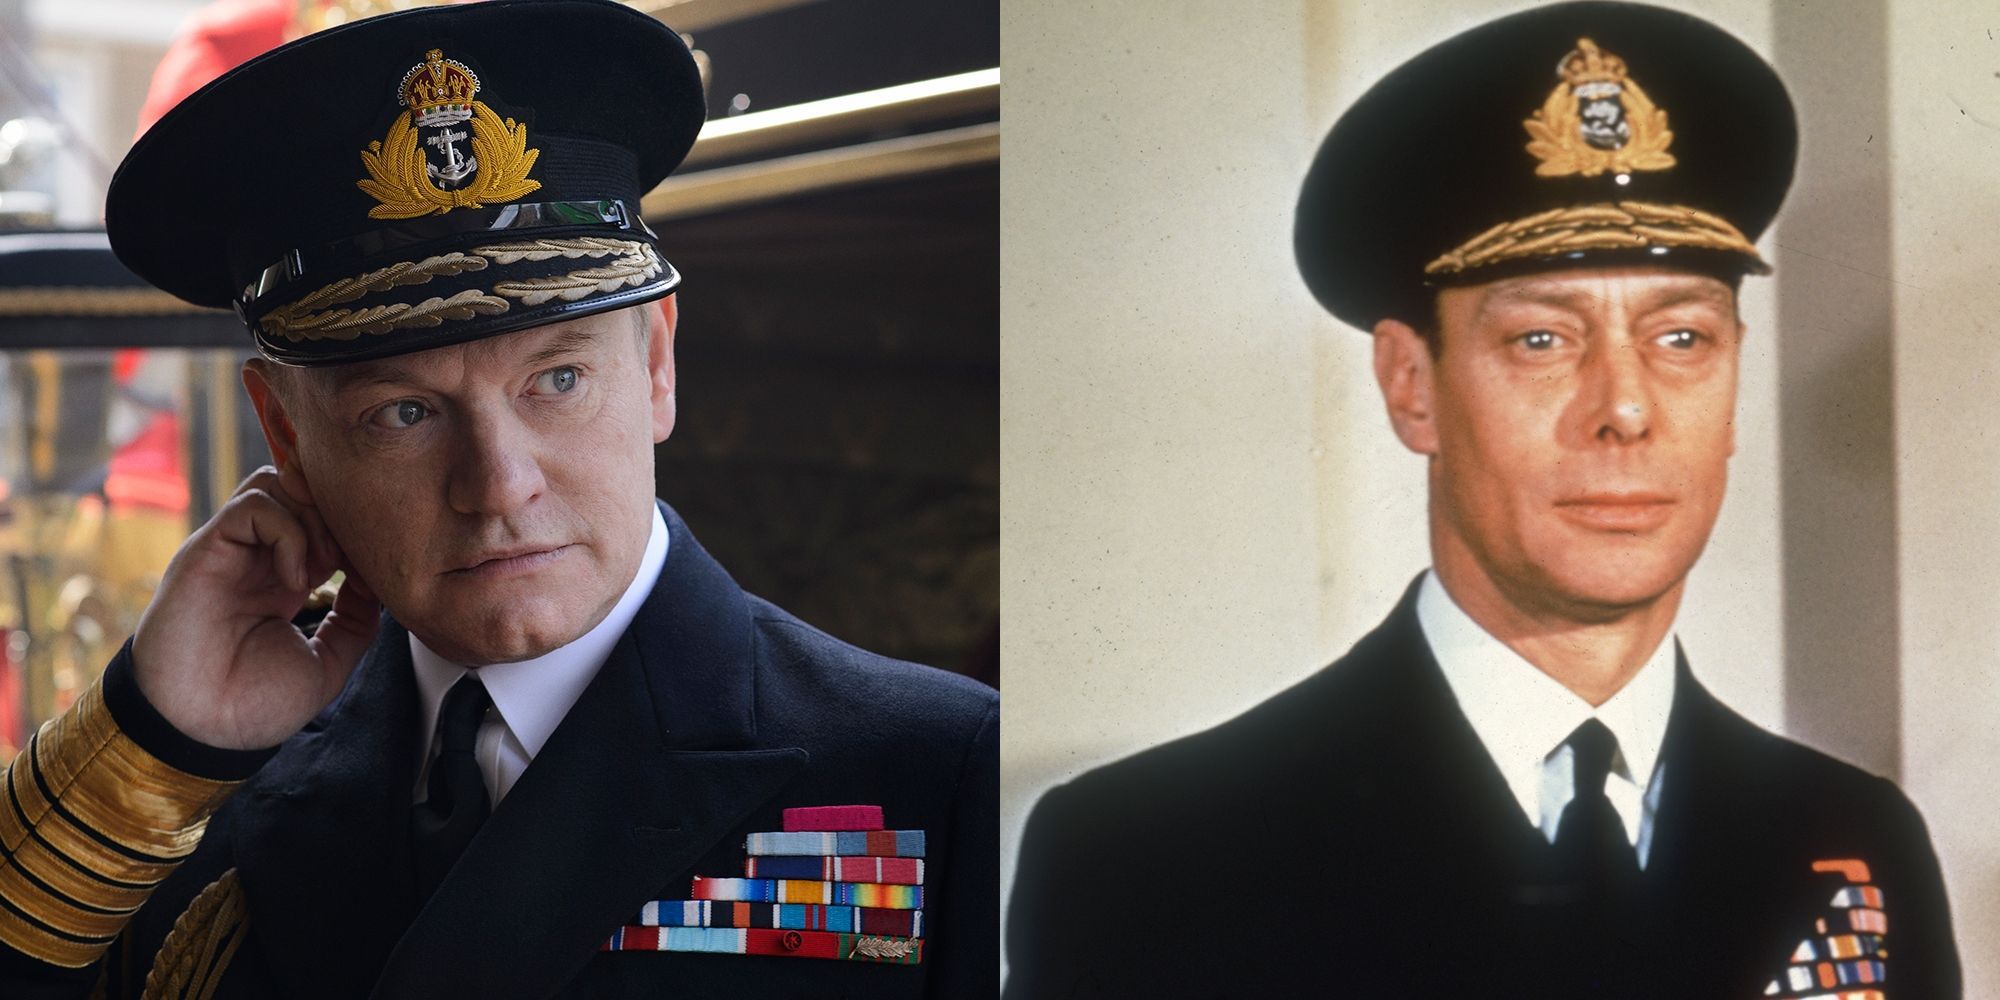 30 'The Crown' Characters With Their Real-Life Counterparts